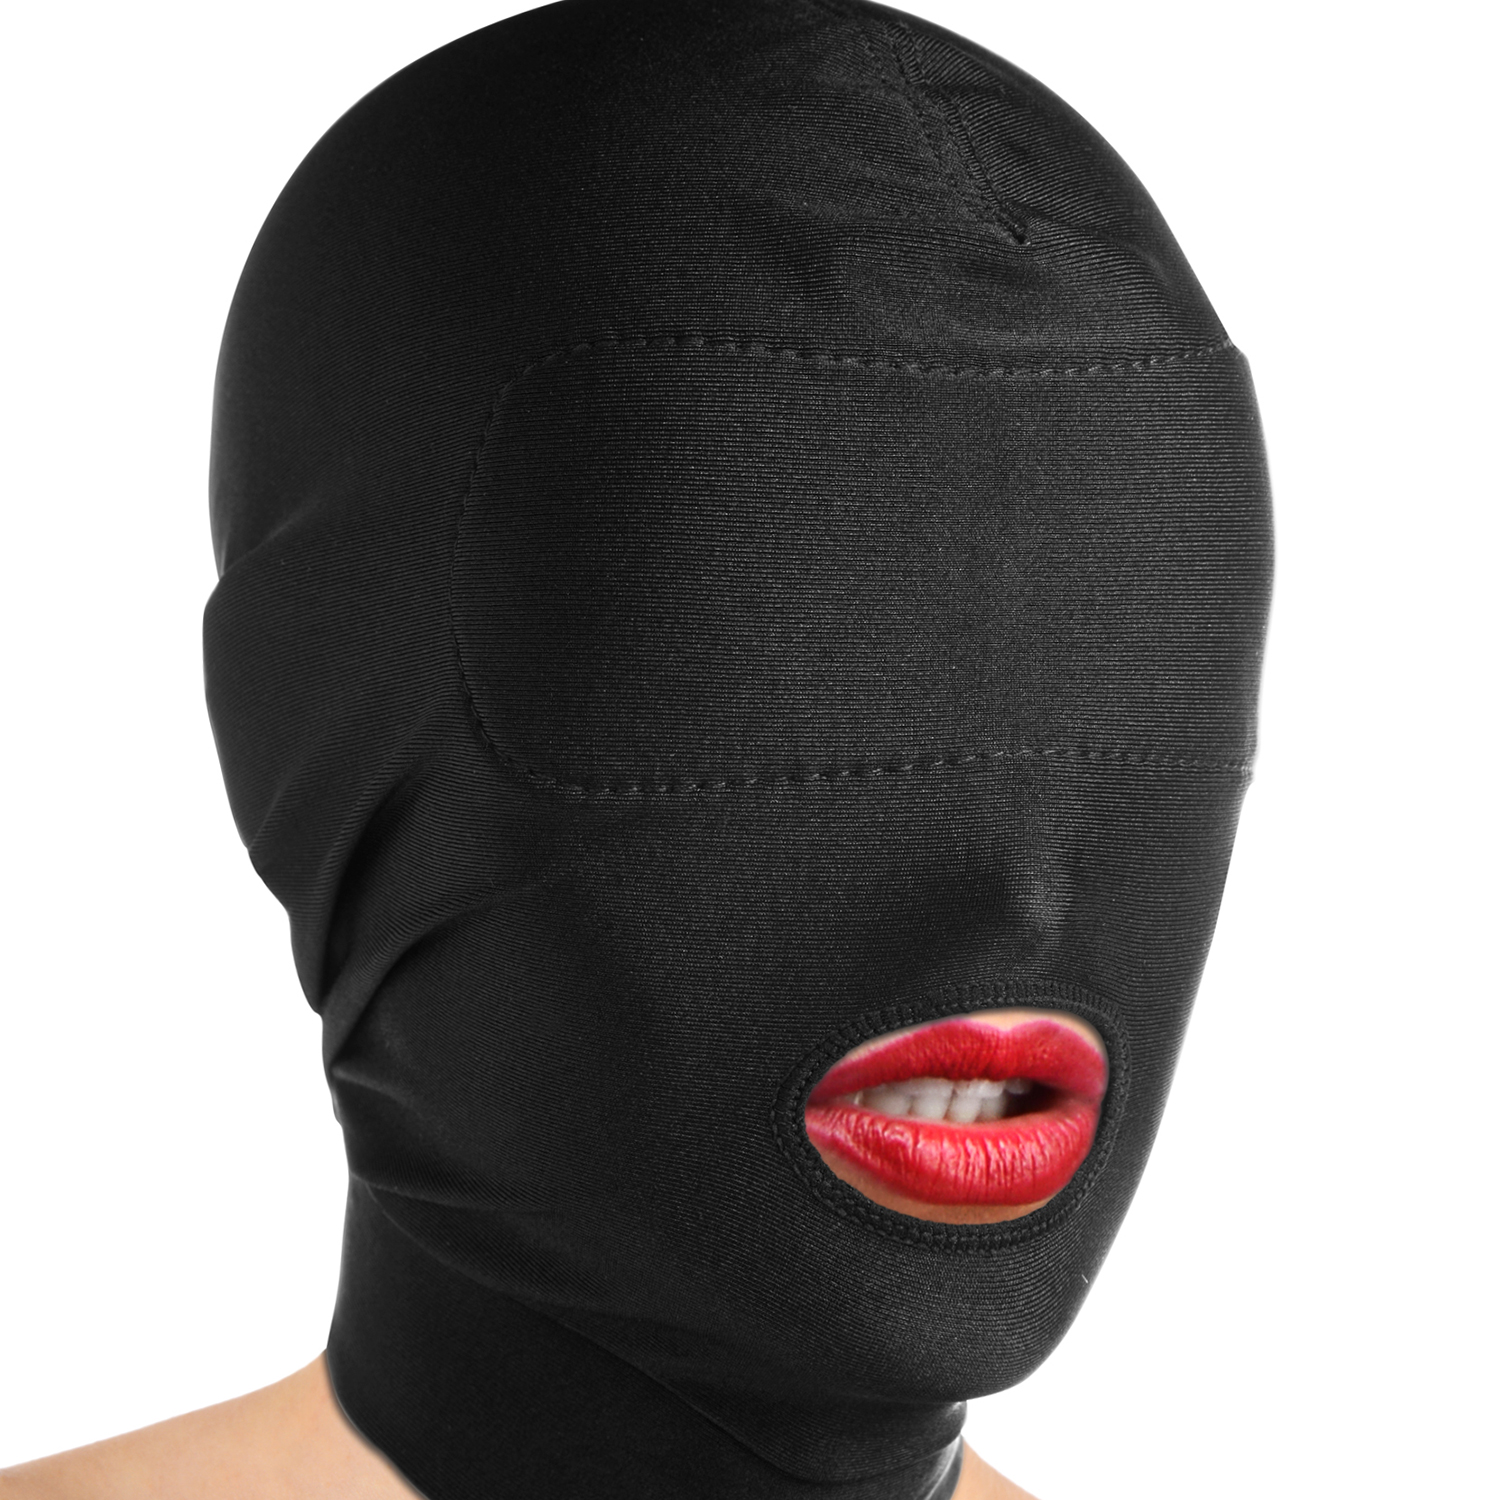 Master Series Disguise Open Mouth Maske med Blindfold thumbnail